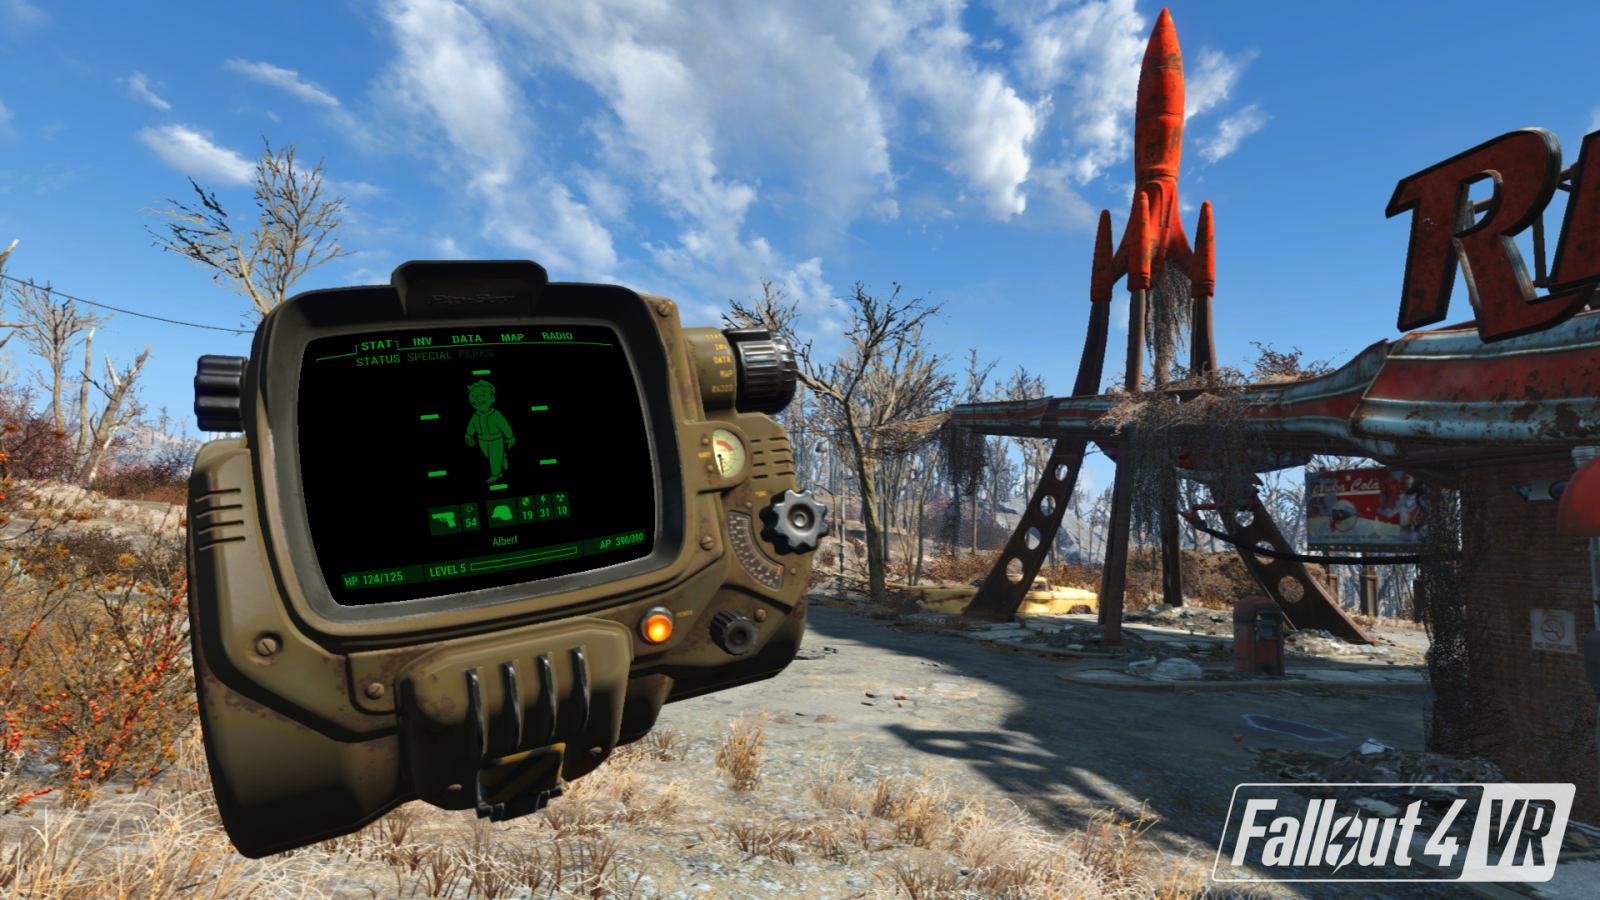 A New View Of The Apocalypse Fallout 4 Vr Hands On Gaming Trend